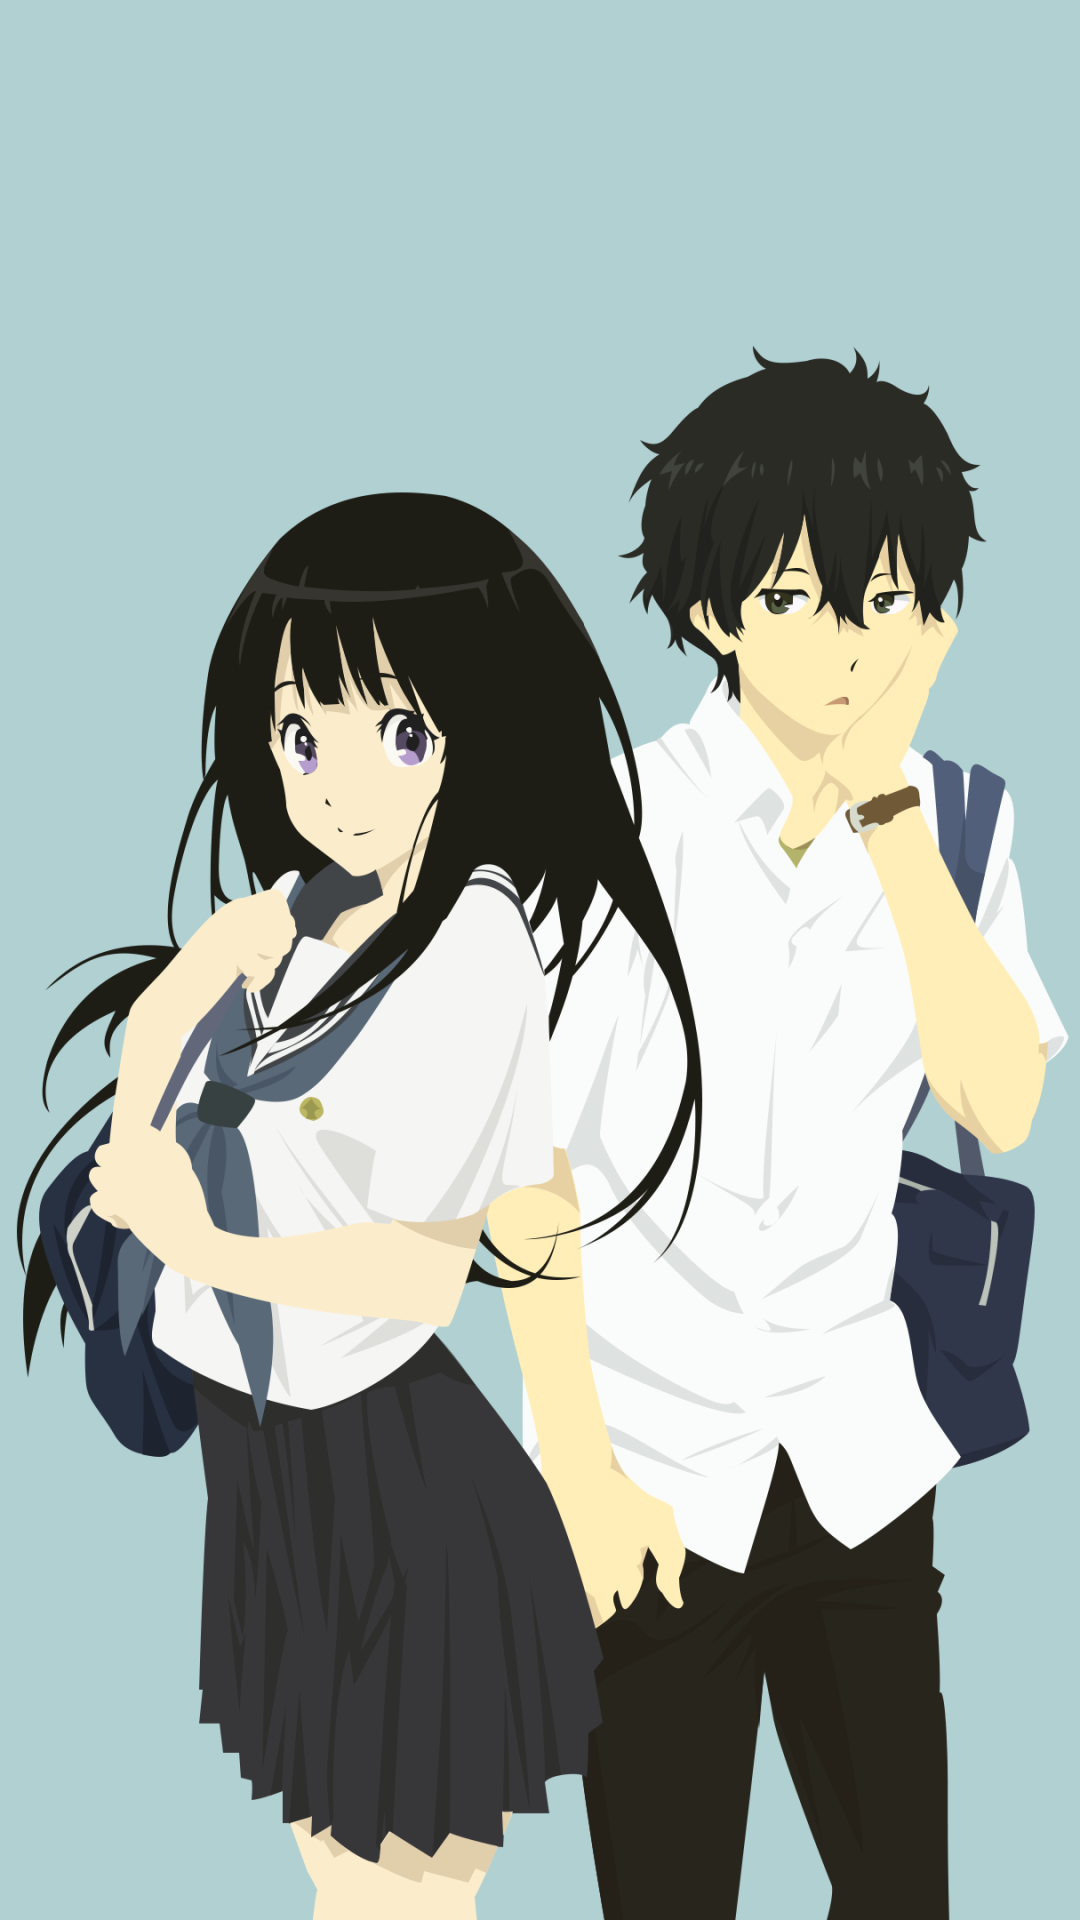 Hyouka Season 2: Release Date and Chances! - YouTube